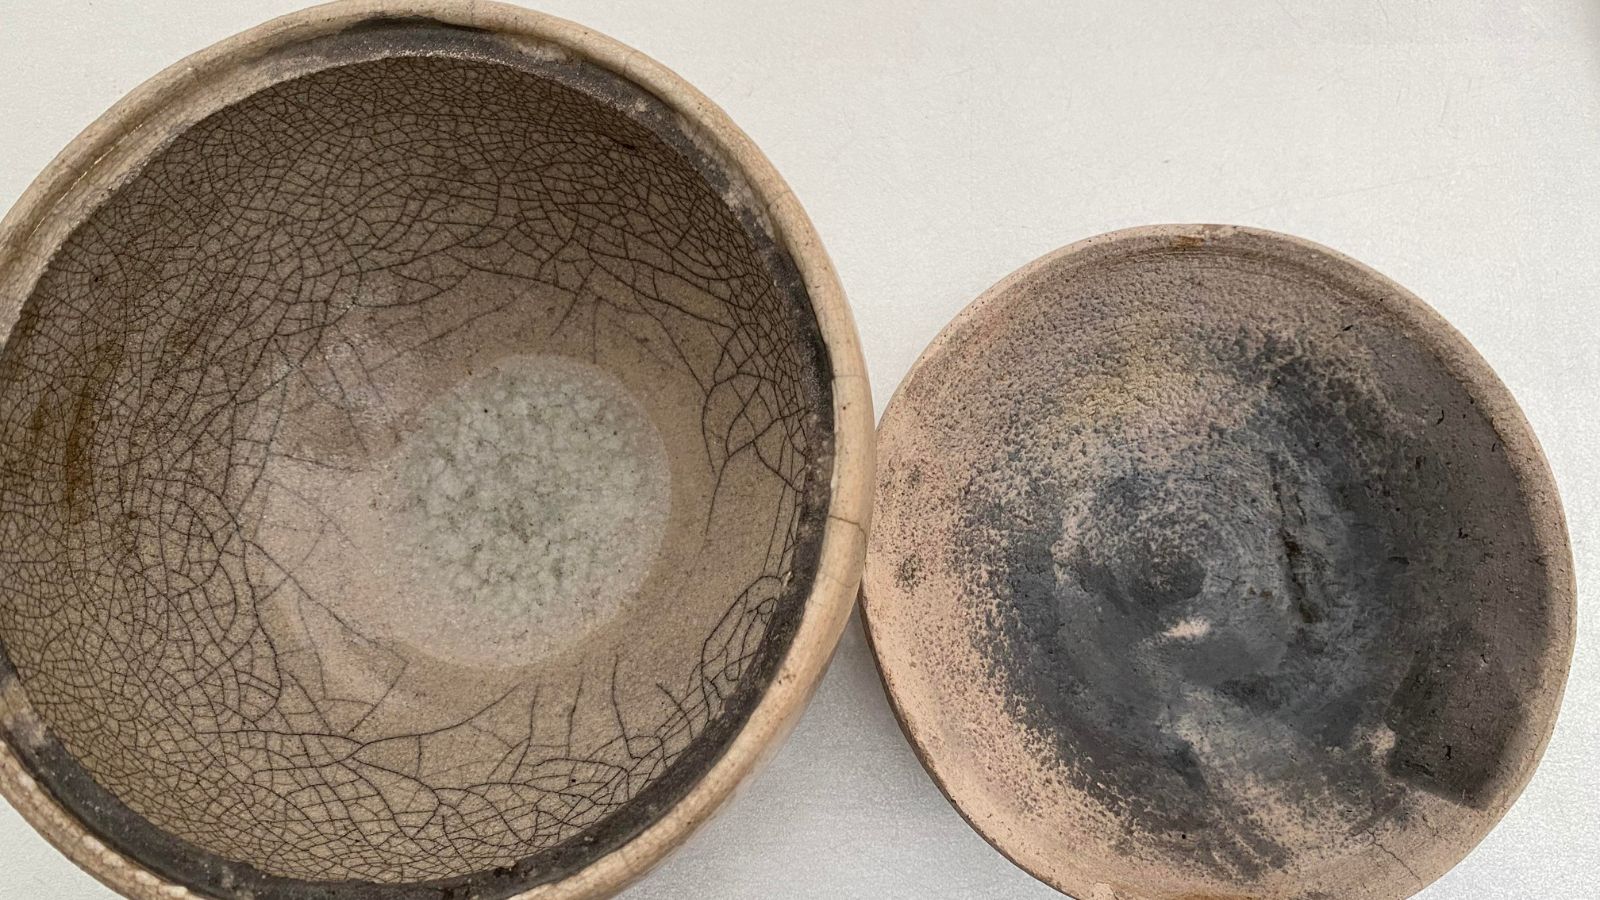 How to Identify Pottery with No Markings